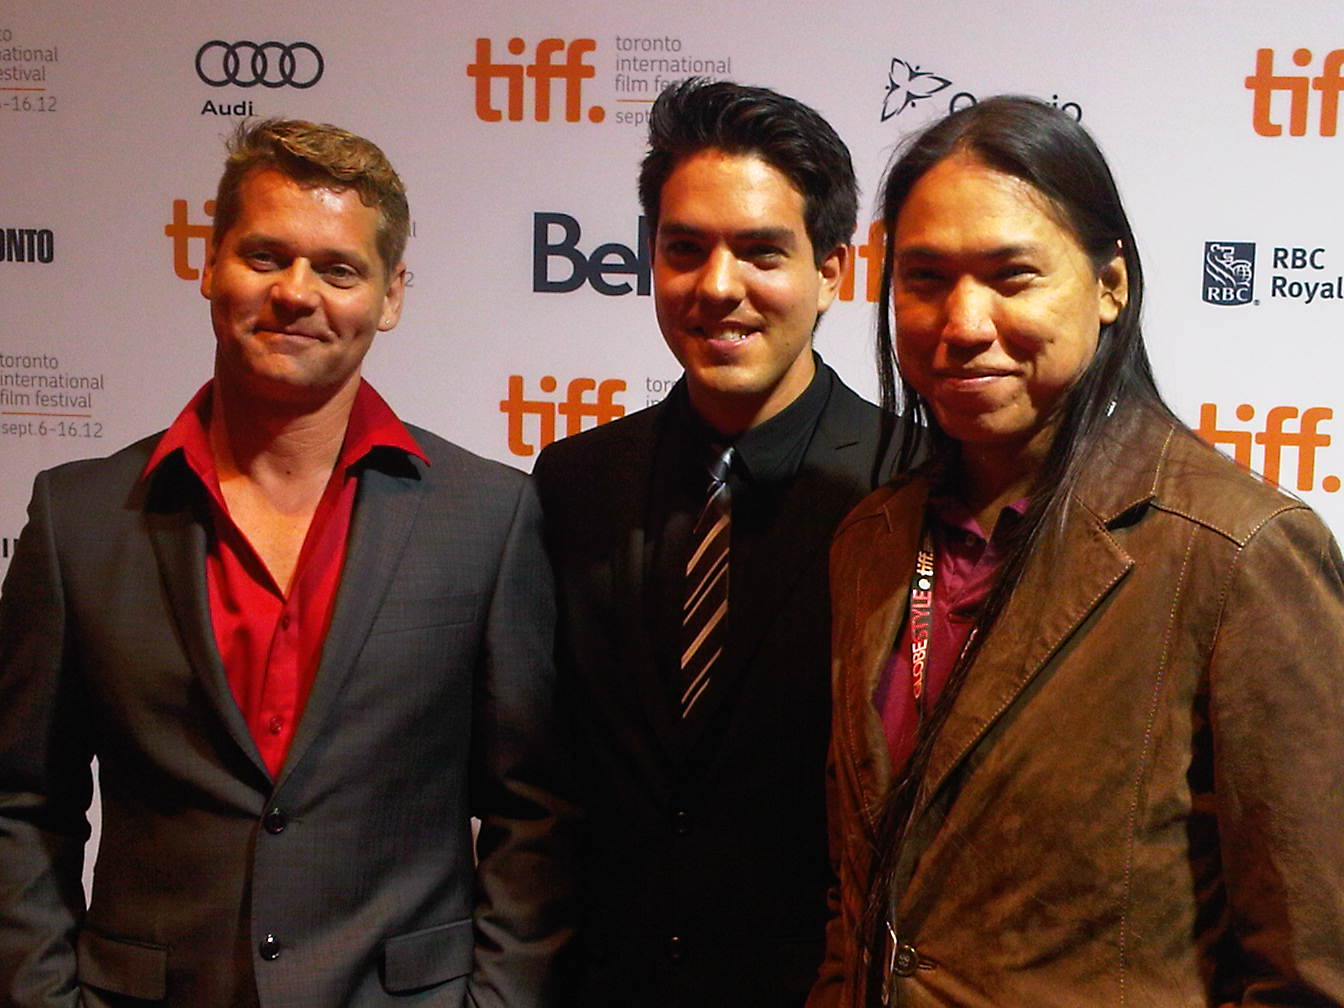 Kelvin with Mikal Grant and William Belleau on the Red Carpet at the Toronto International Film Festival